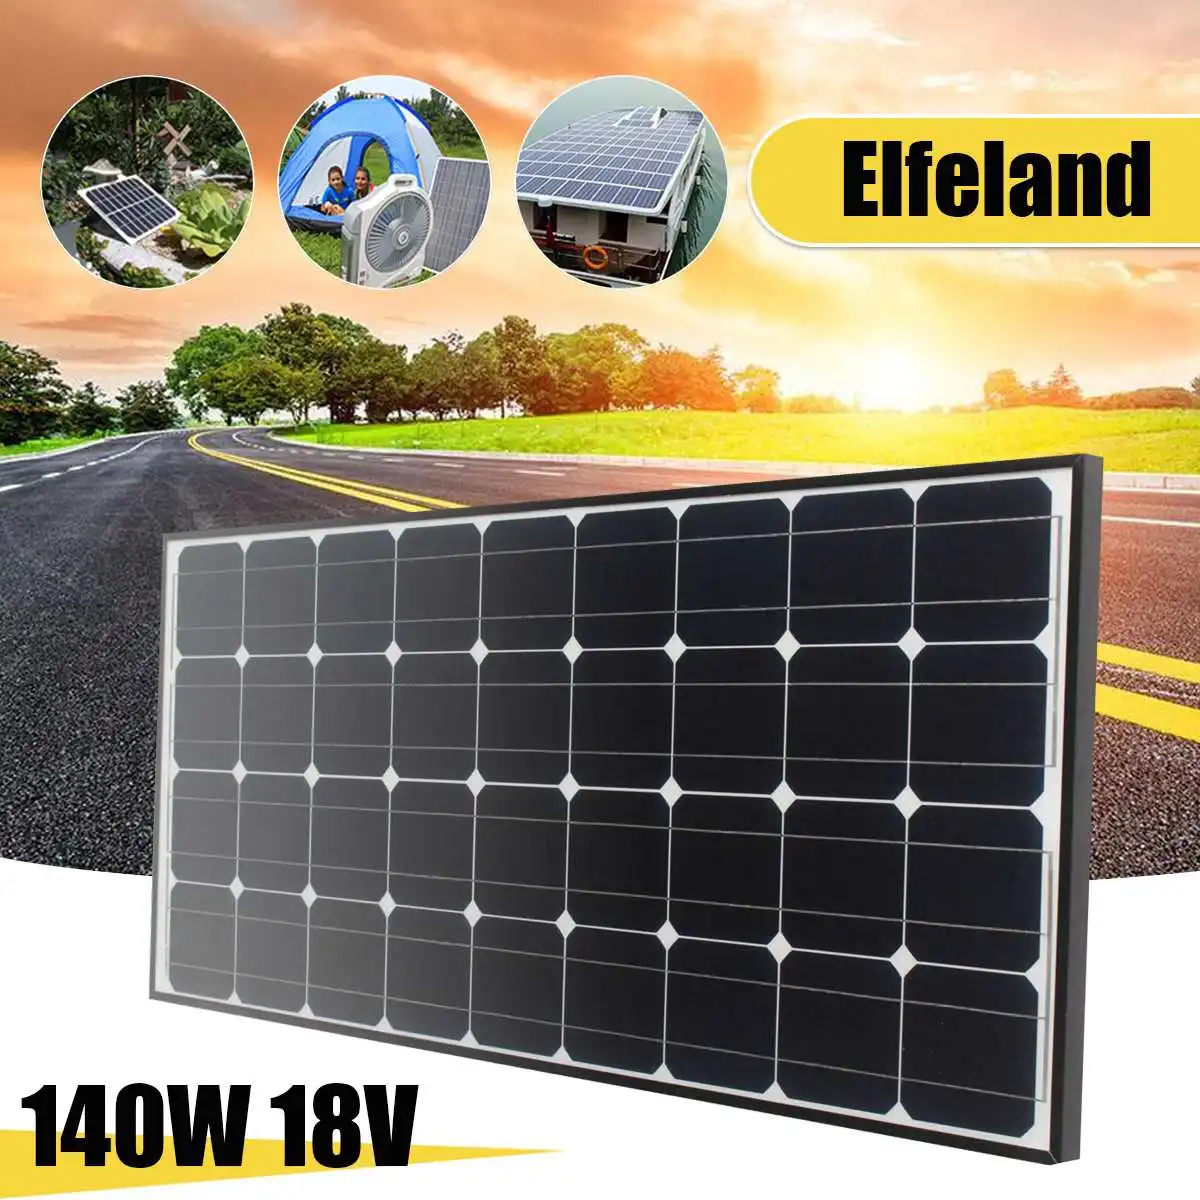 

Monocrystalline Silicon Solar Panels Silver Black car batteries car RV, boat ship aircraft satellites space stations